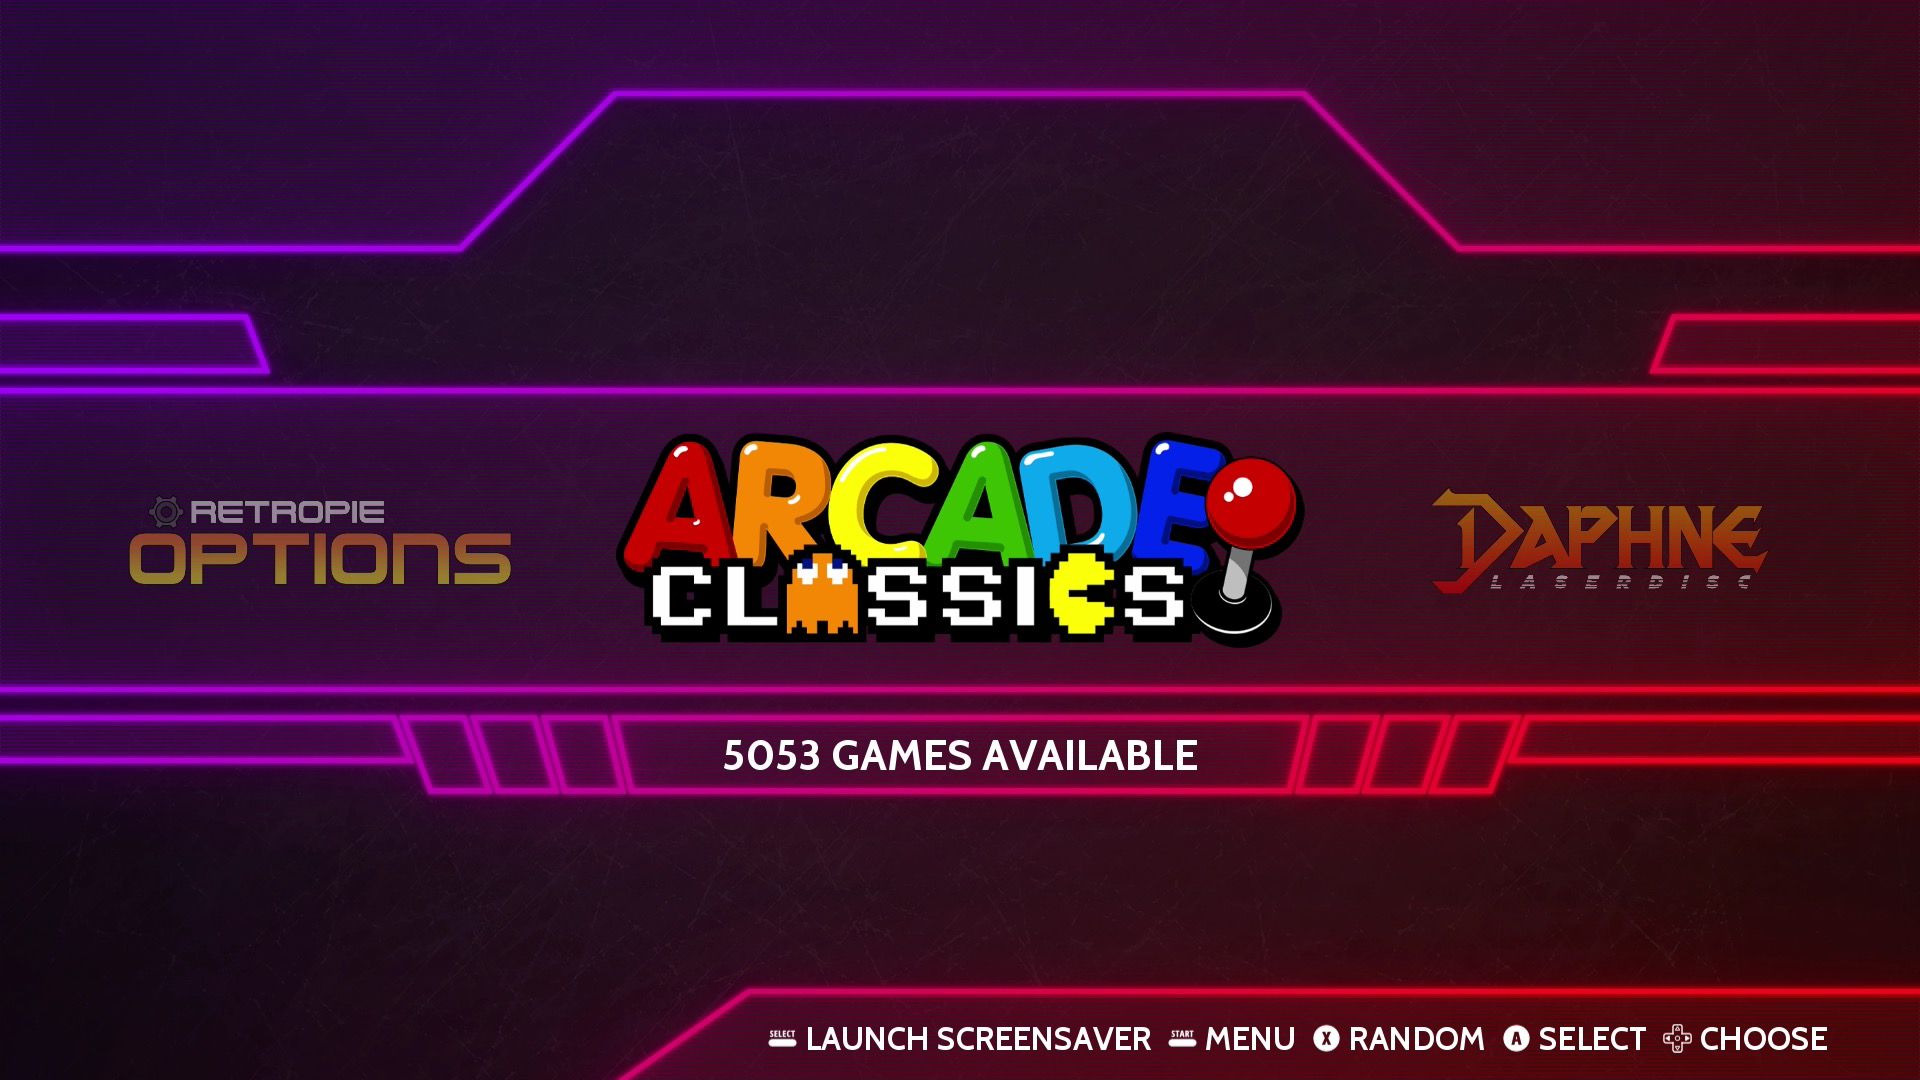 New Neon Overdrive Themes from Super Retropie! 